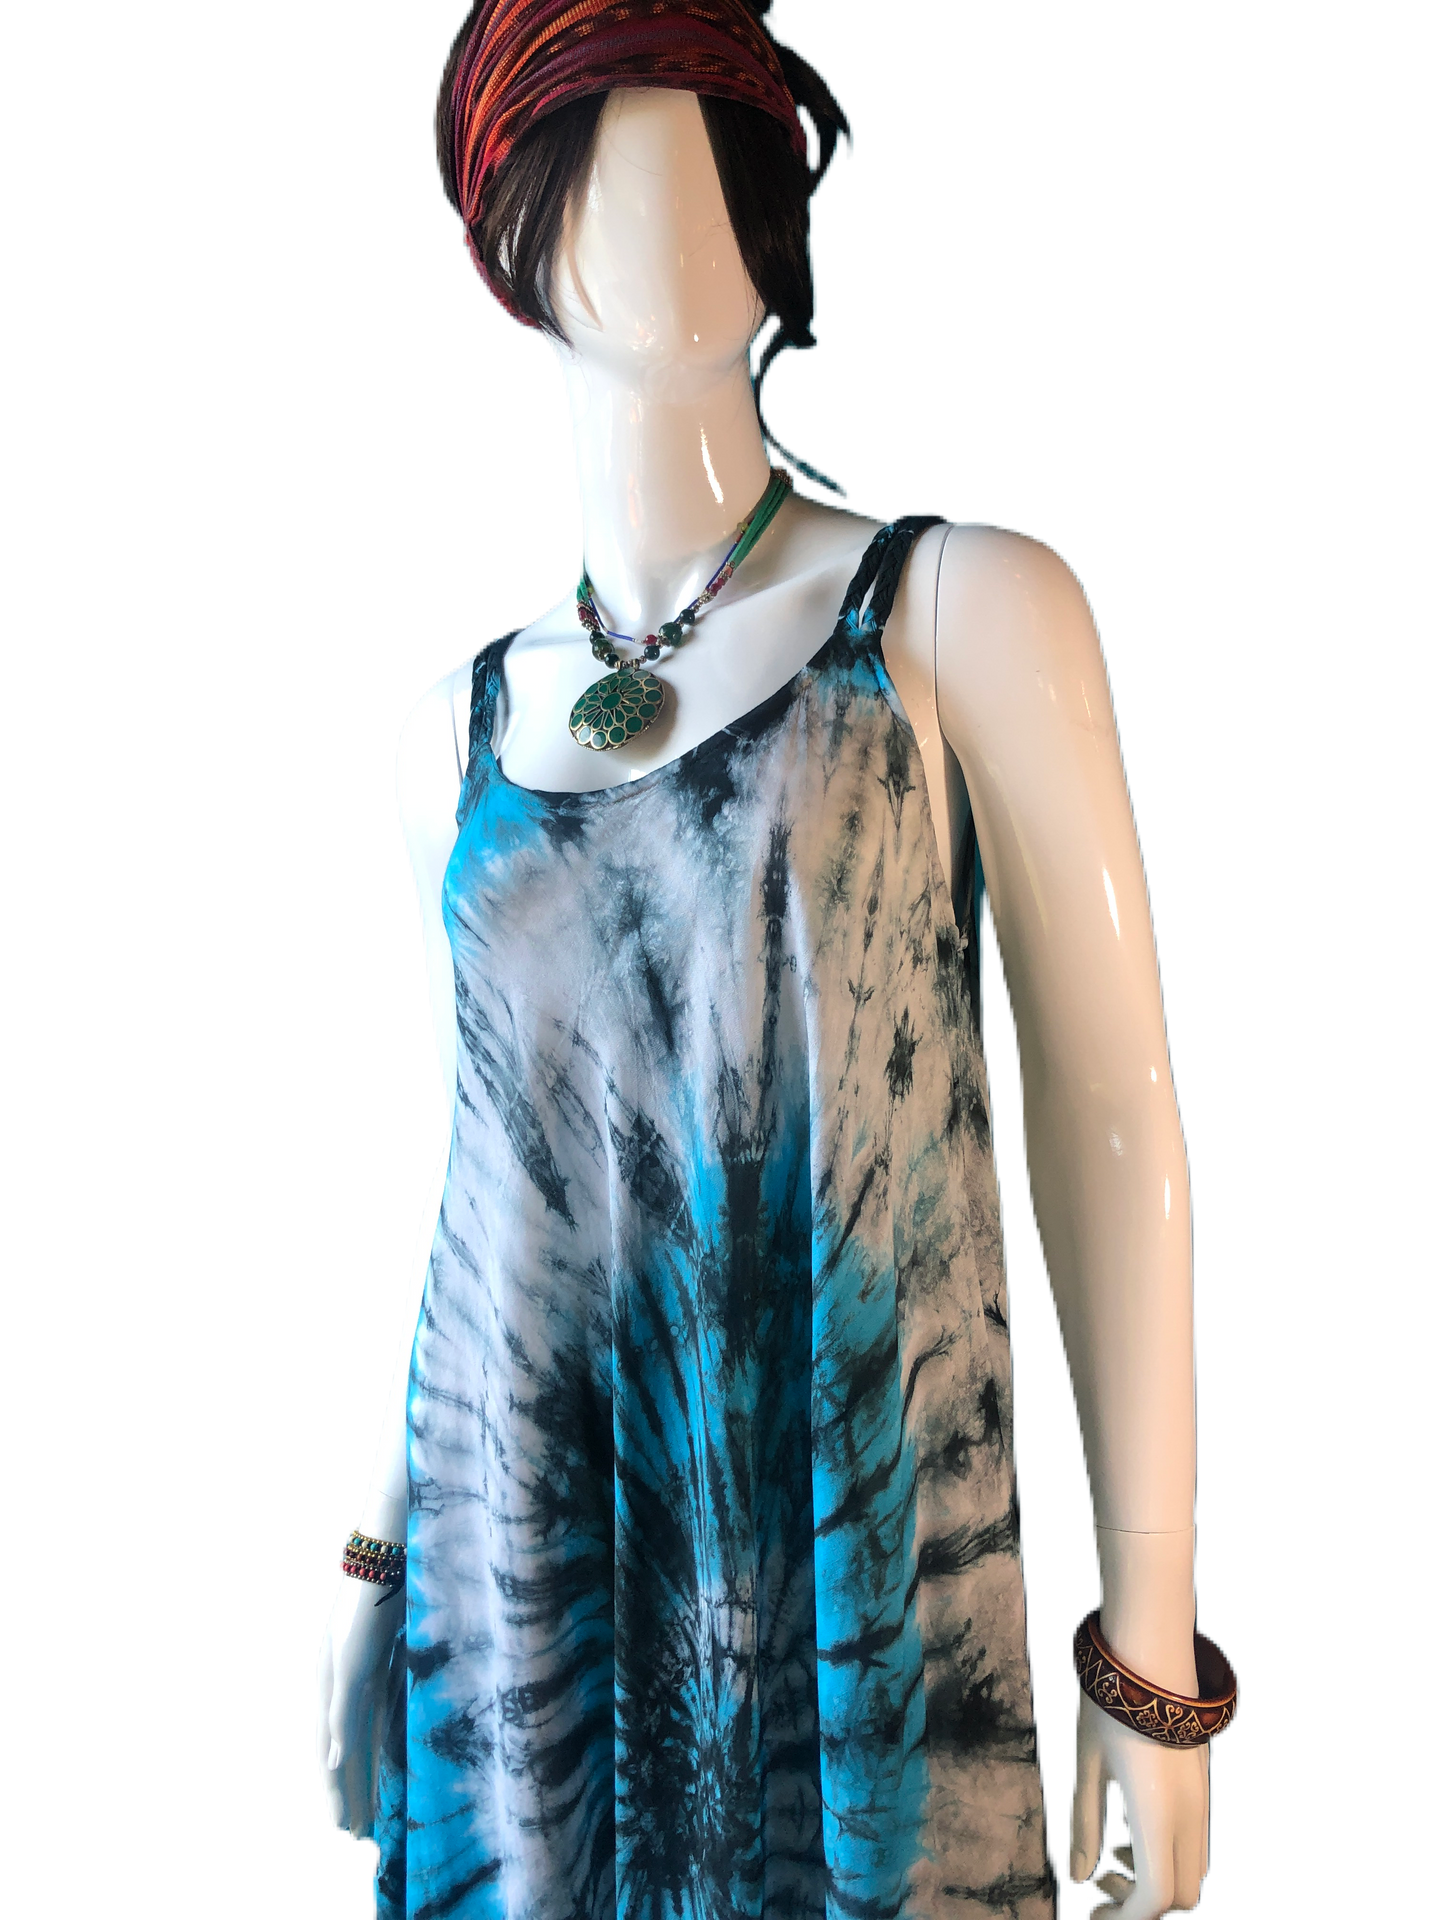 Mendenhall Ice caves (Double Braided Strap Dress)